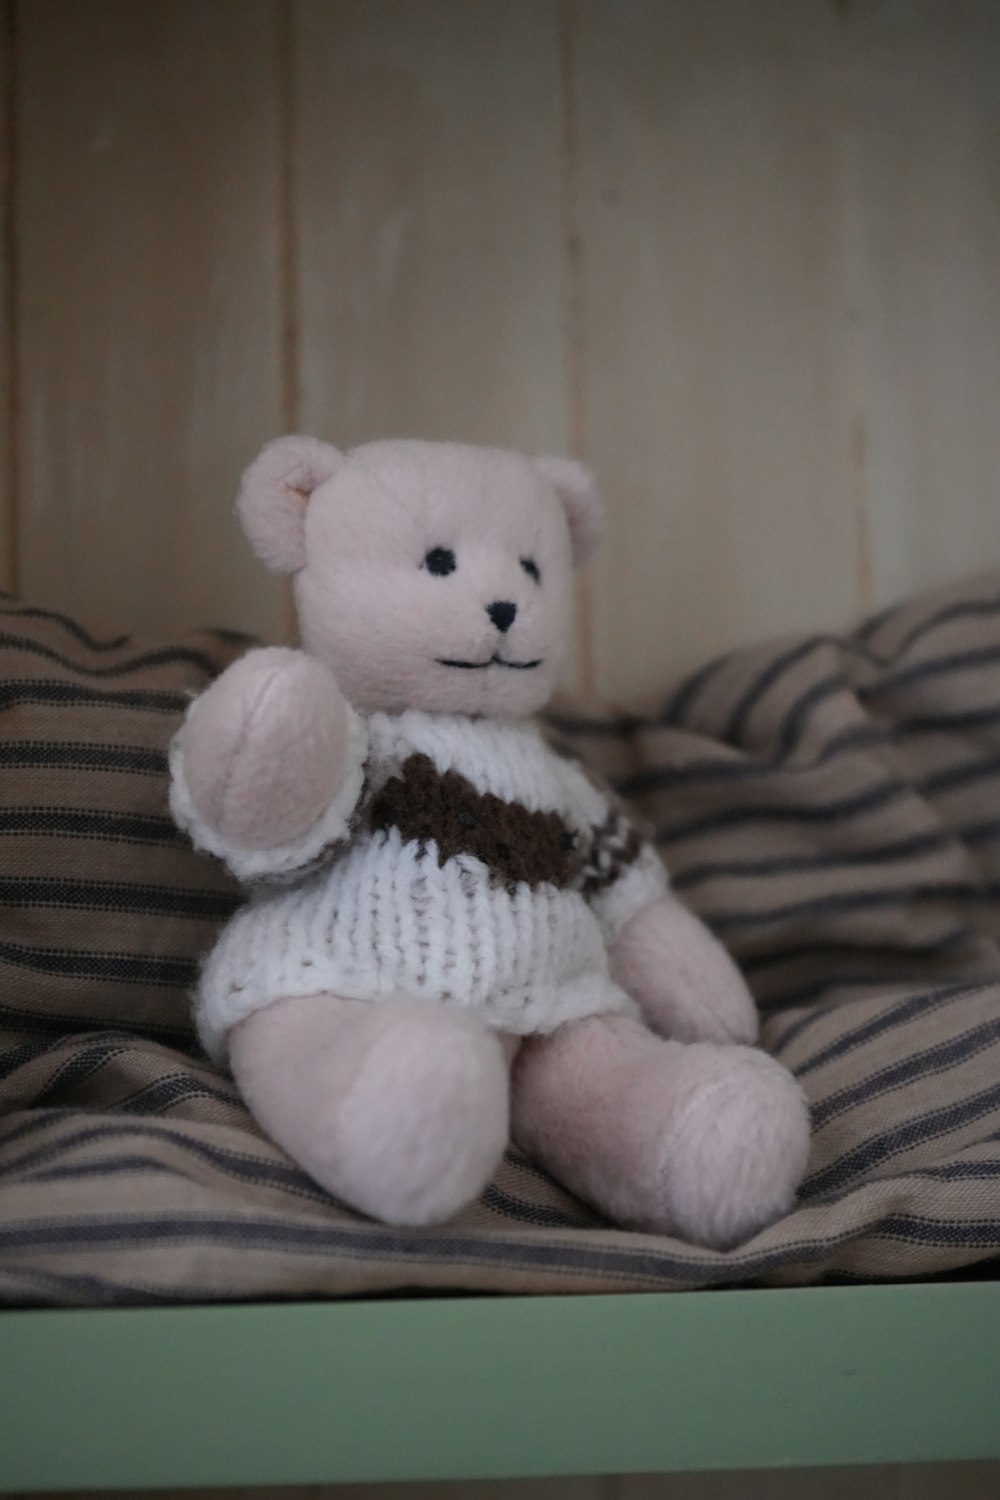 a teddy bear wearing a sweater sitting on a bed